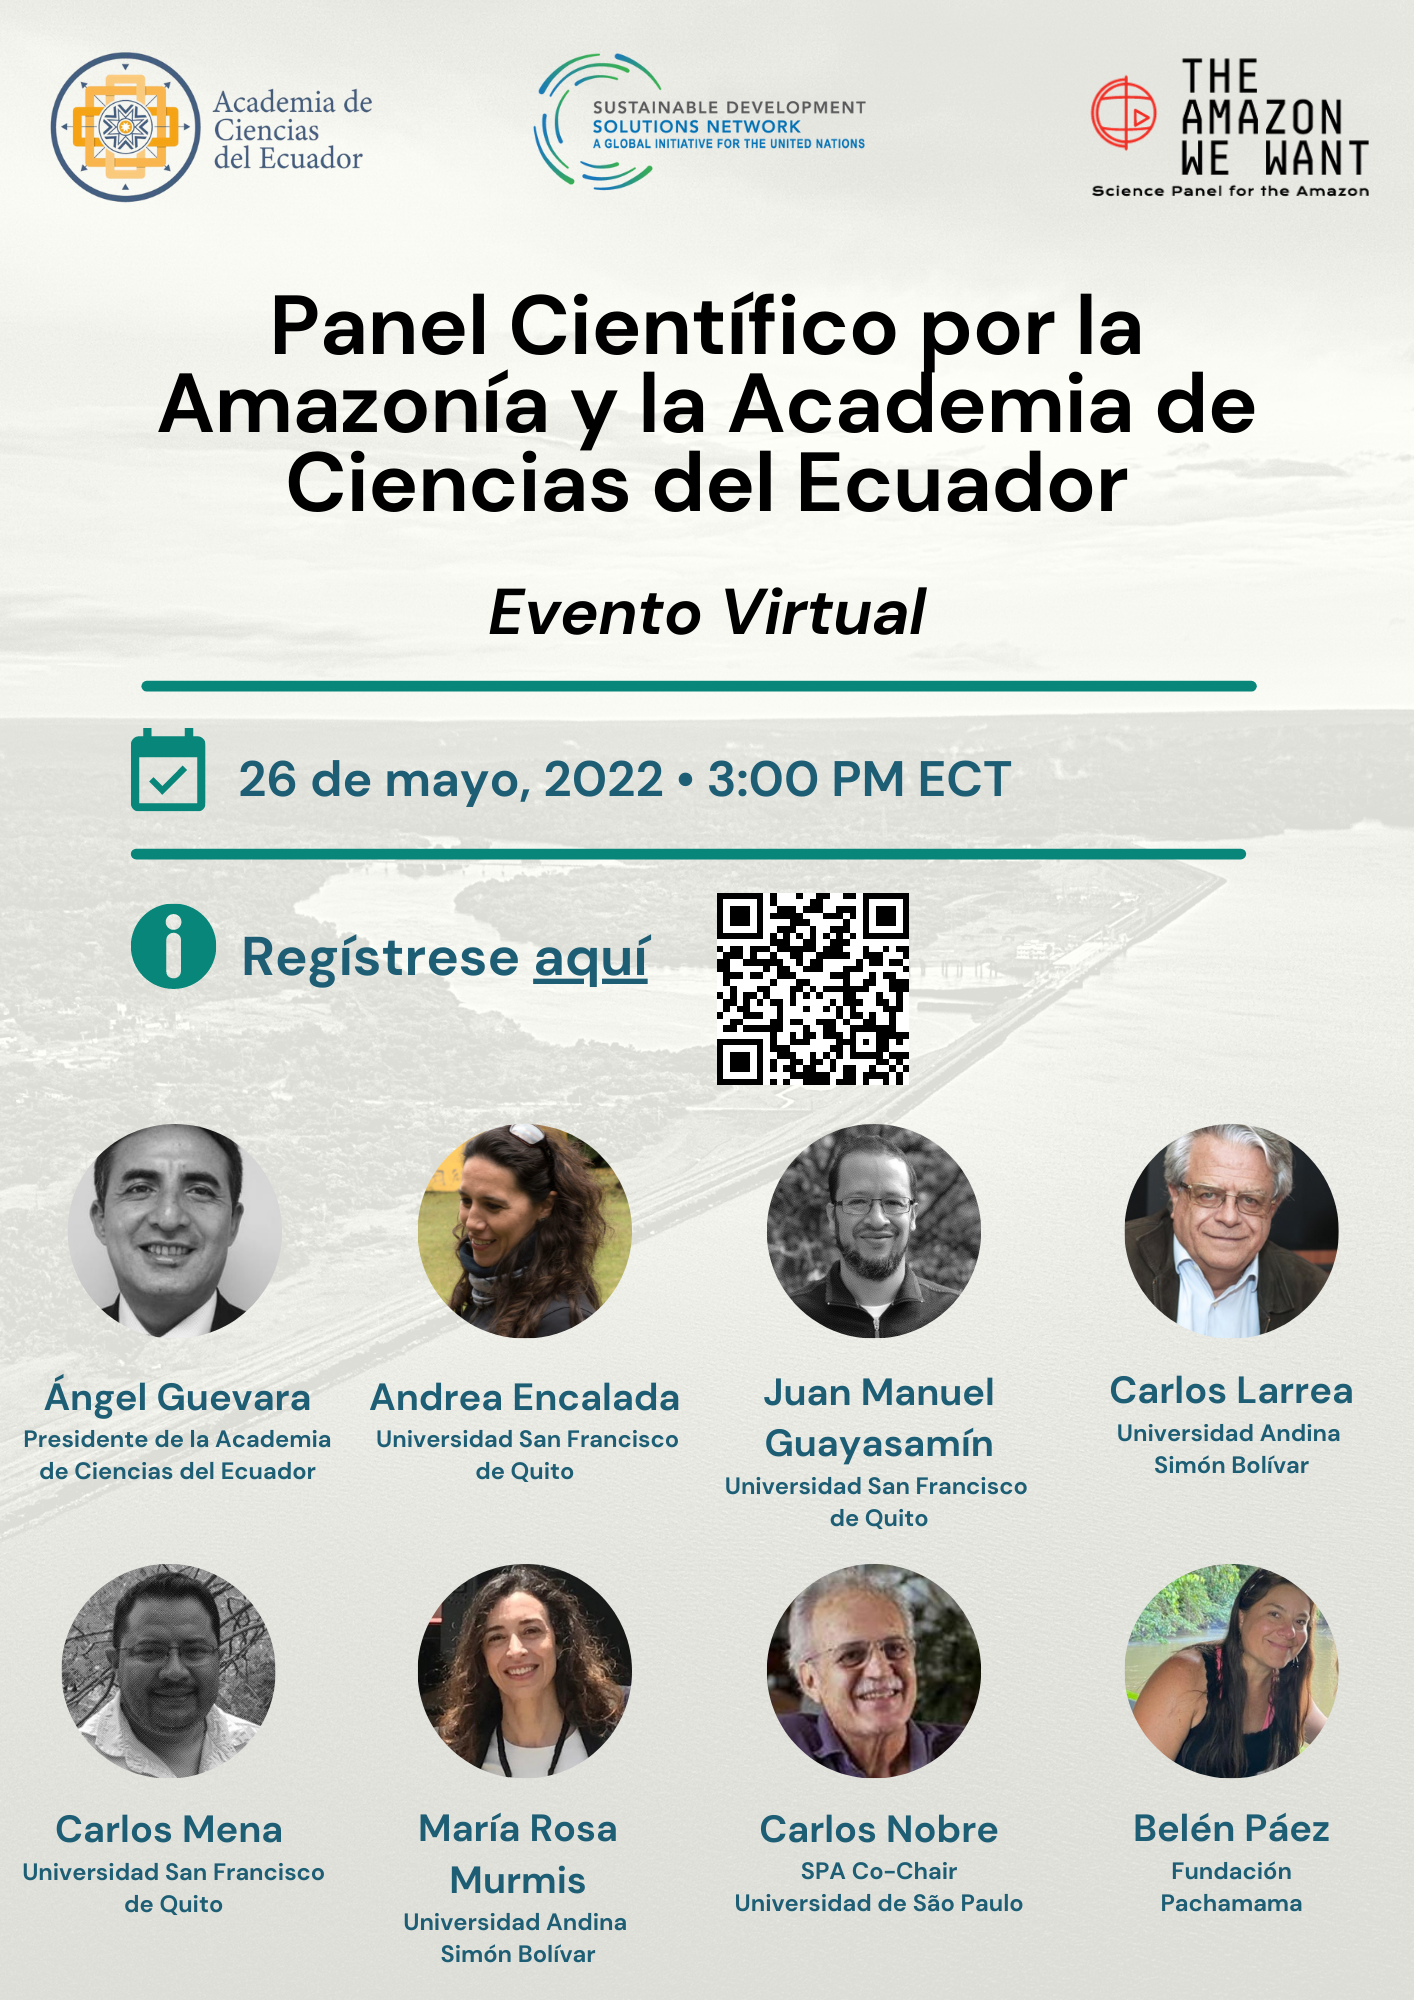 The Academy of Sciences of Ecuador and Science Panel for the Amazon virtual event